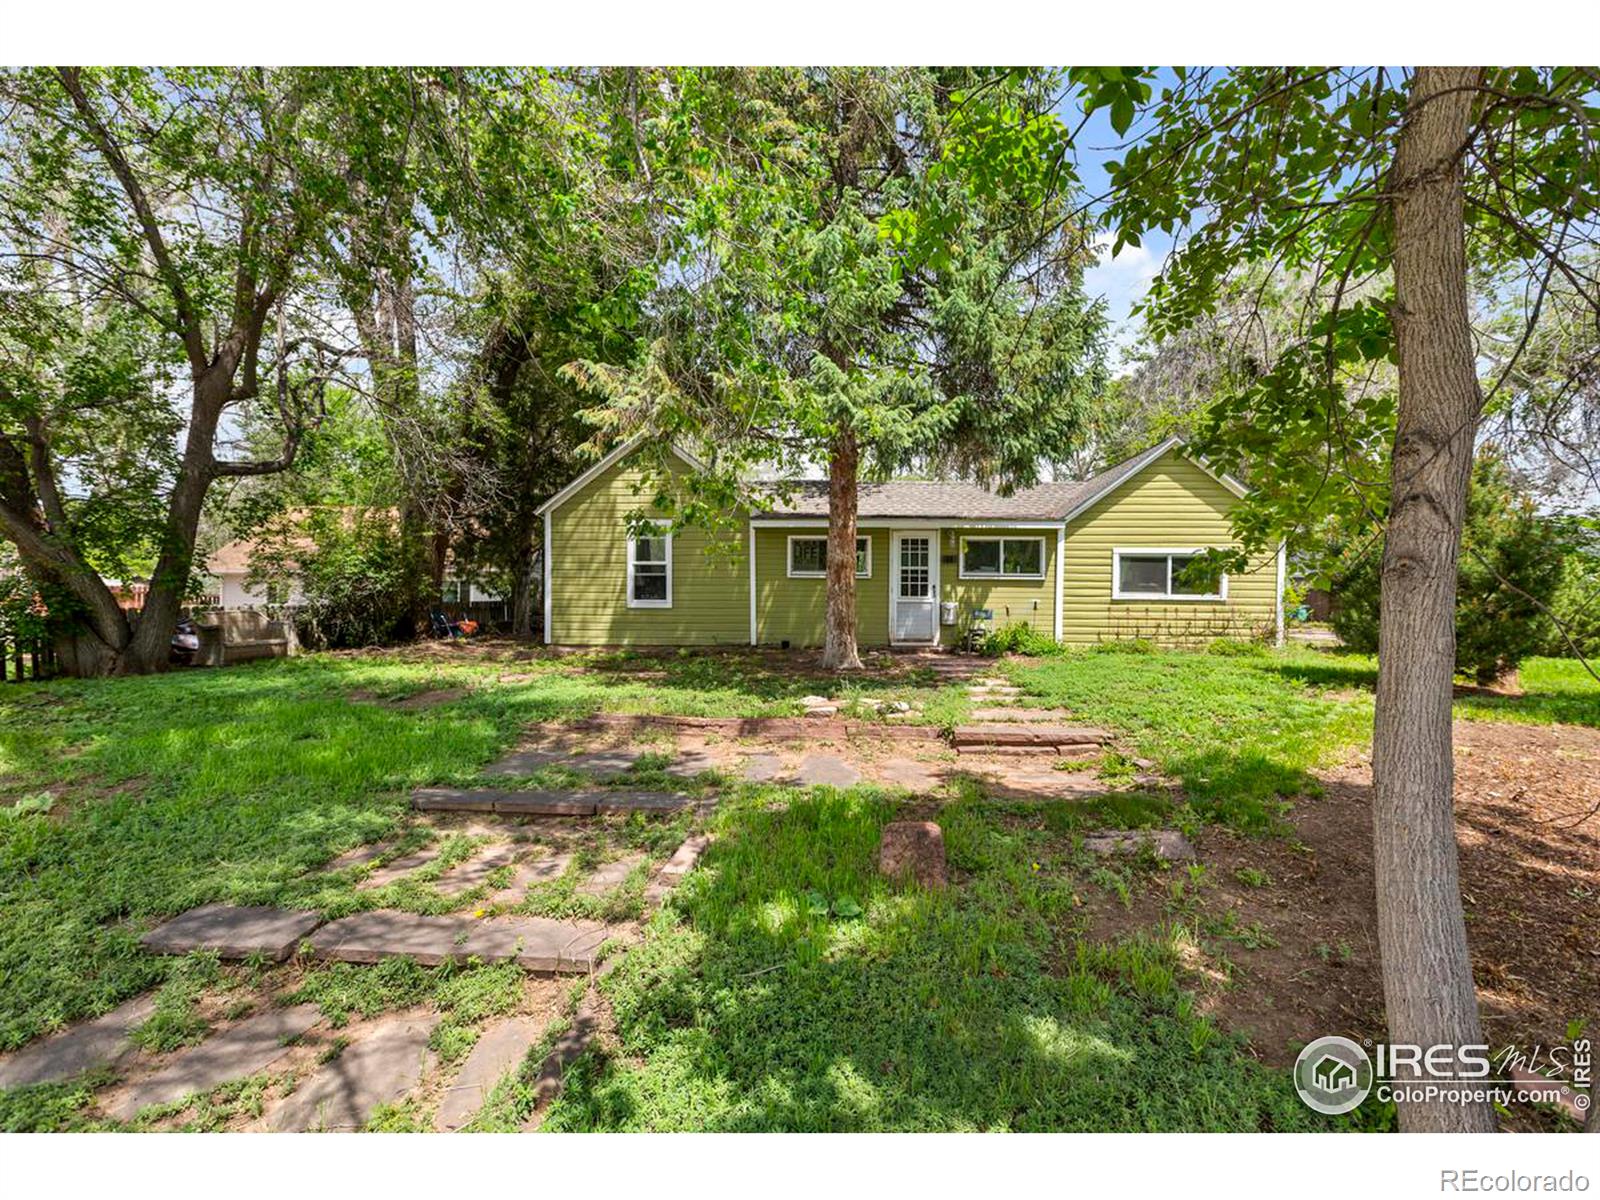 818  Sycamore Street, fort collins MLS: 456789989802 Beds: 4 Baths: 2 Price: $775,000